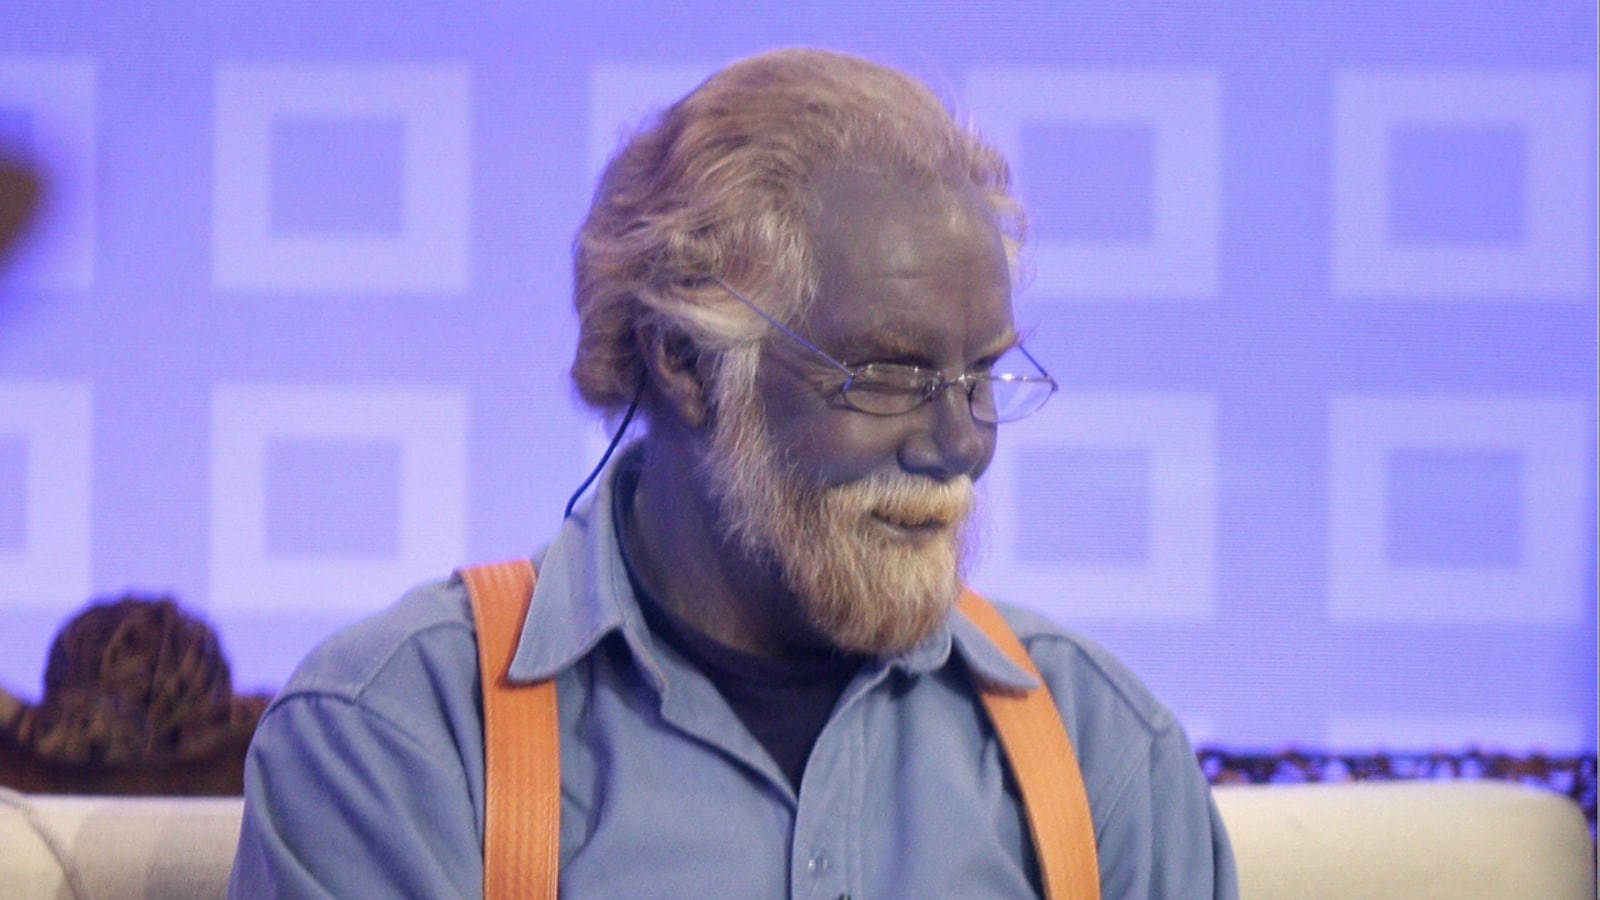 Blue man Paul Karason is still blue after he self-medicates with silver for  a skin condition